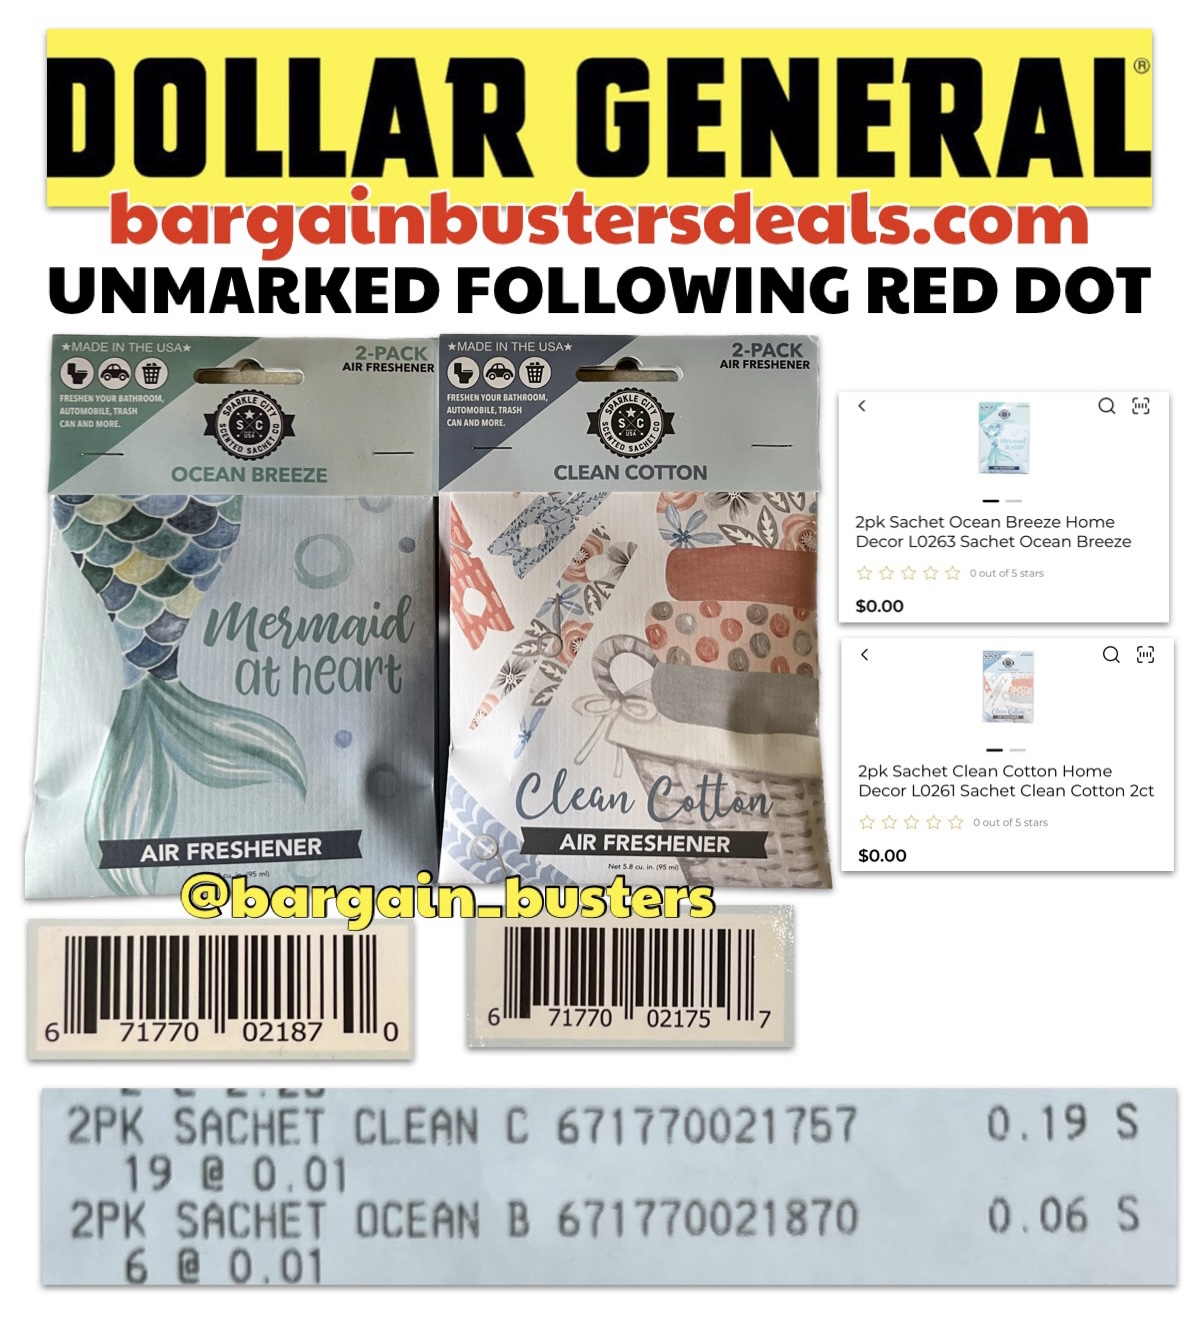 Red Dot Home List & Visuals Dollar General Bargain Busters Deals